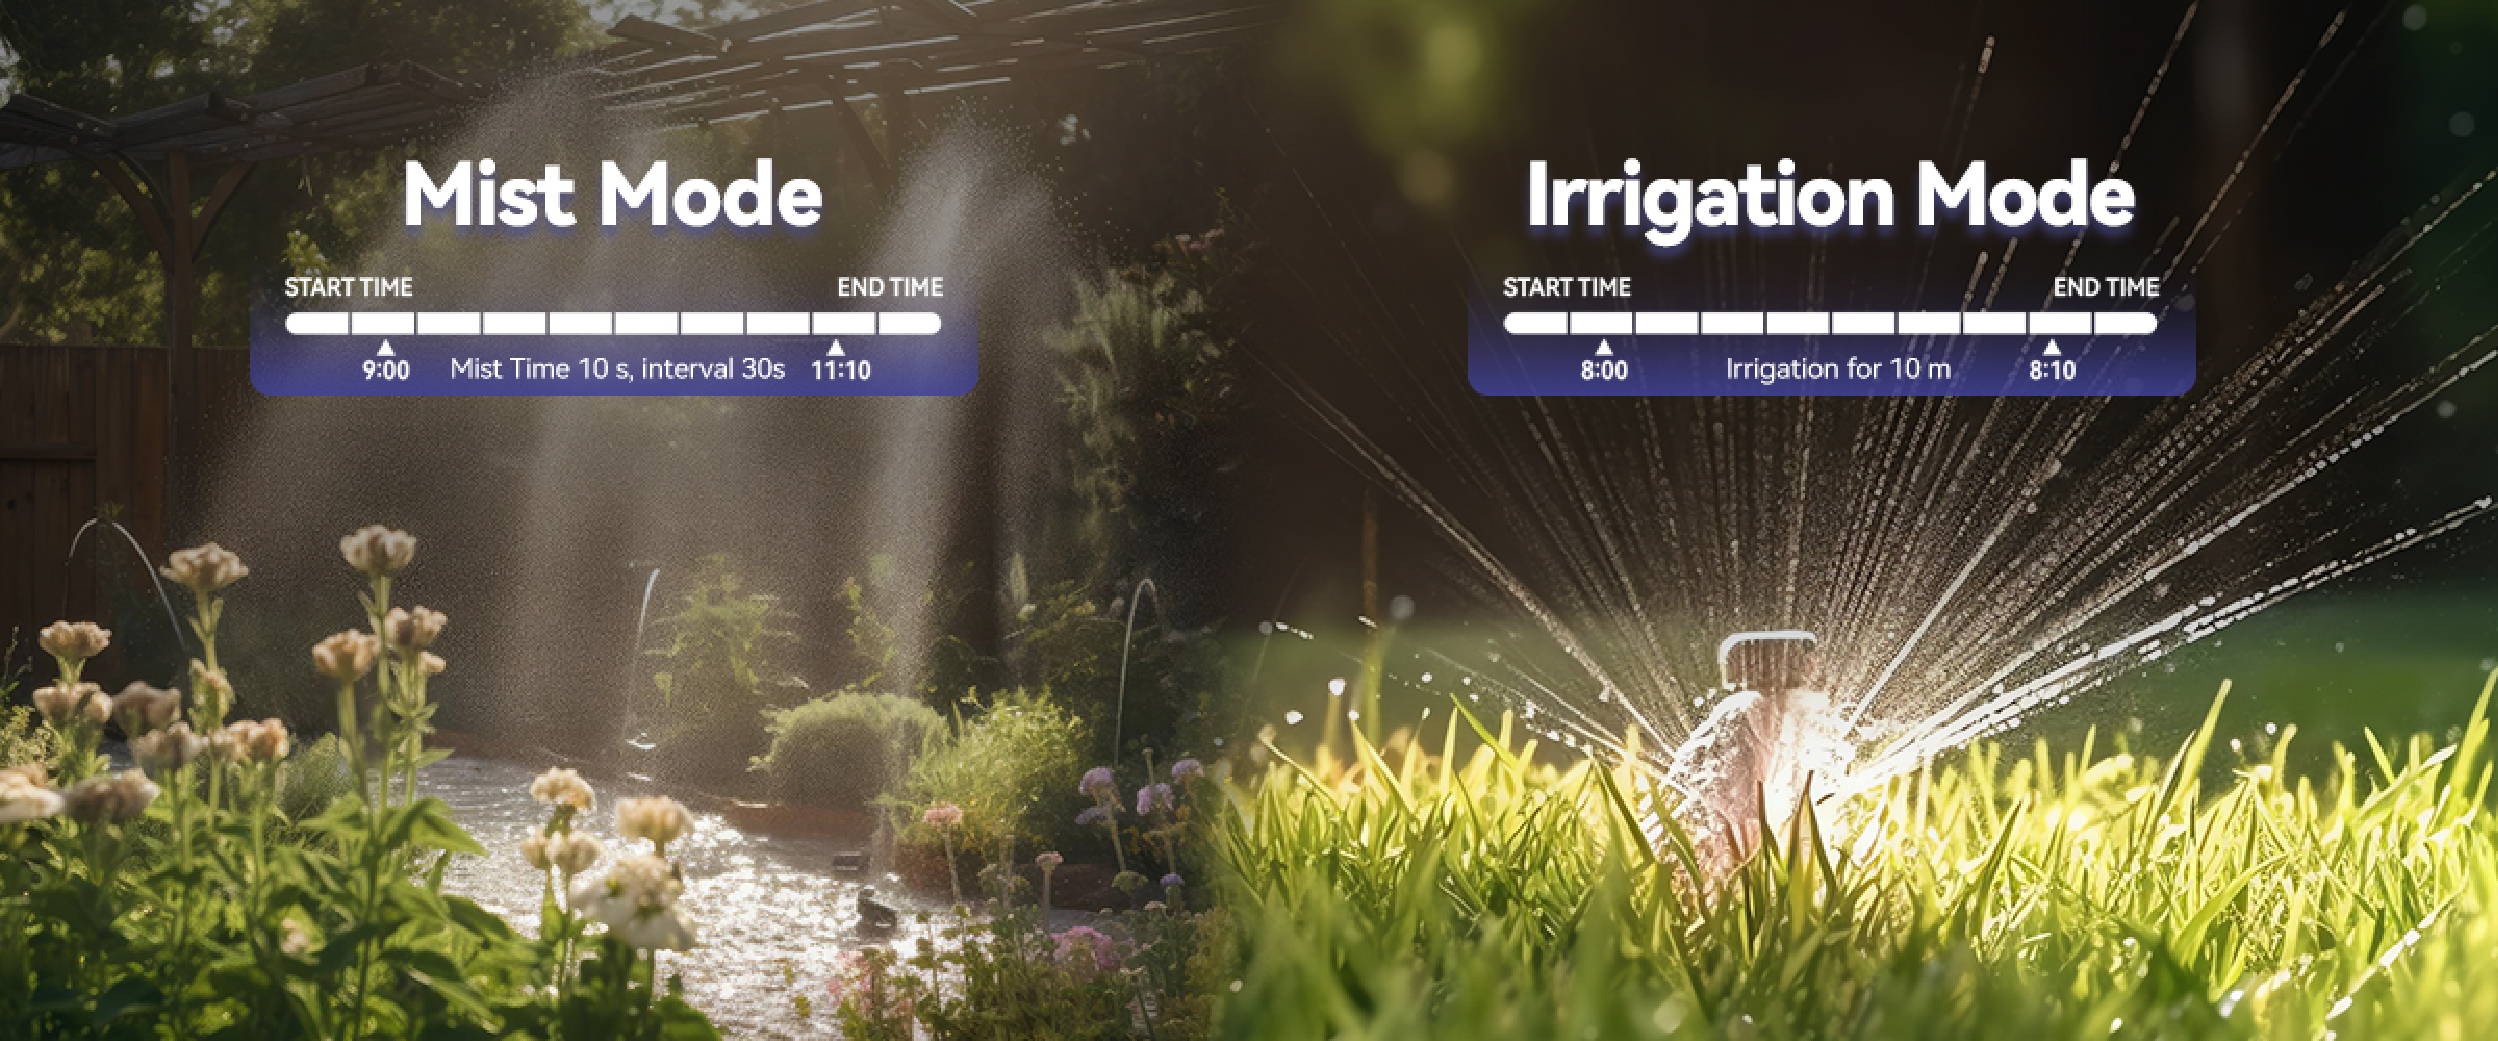 Smart watering with 2 modes